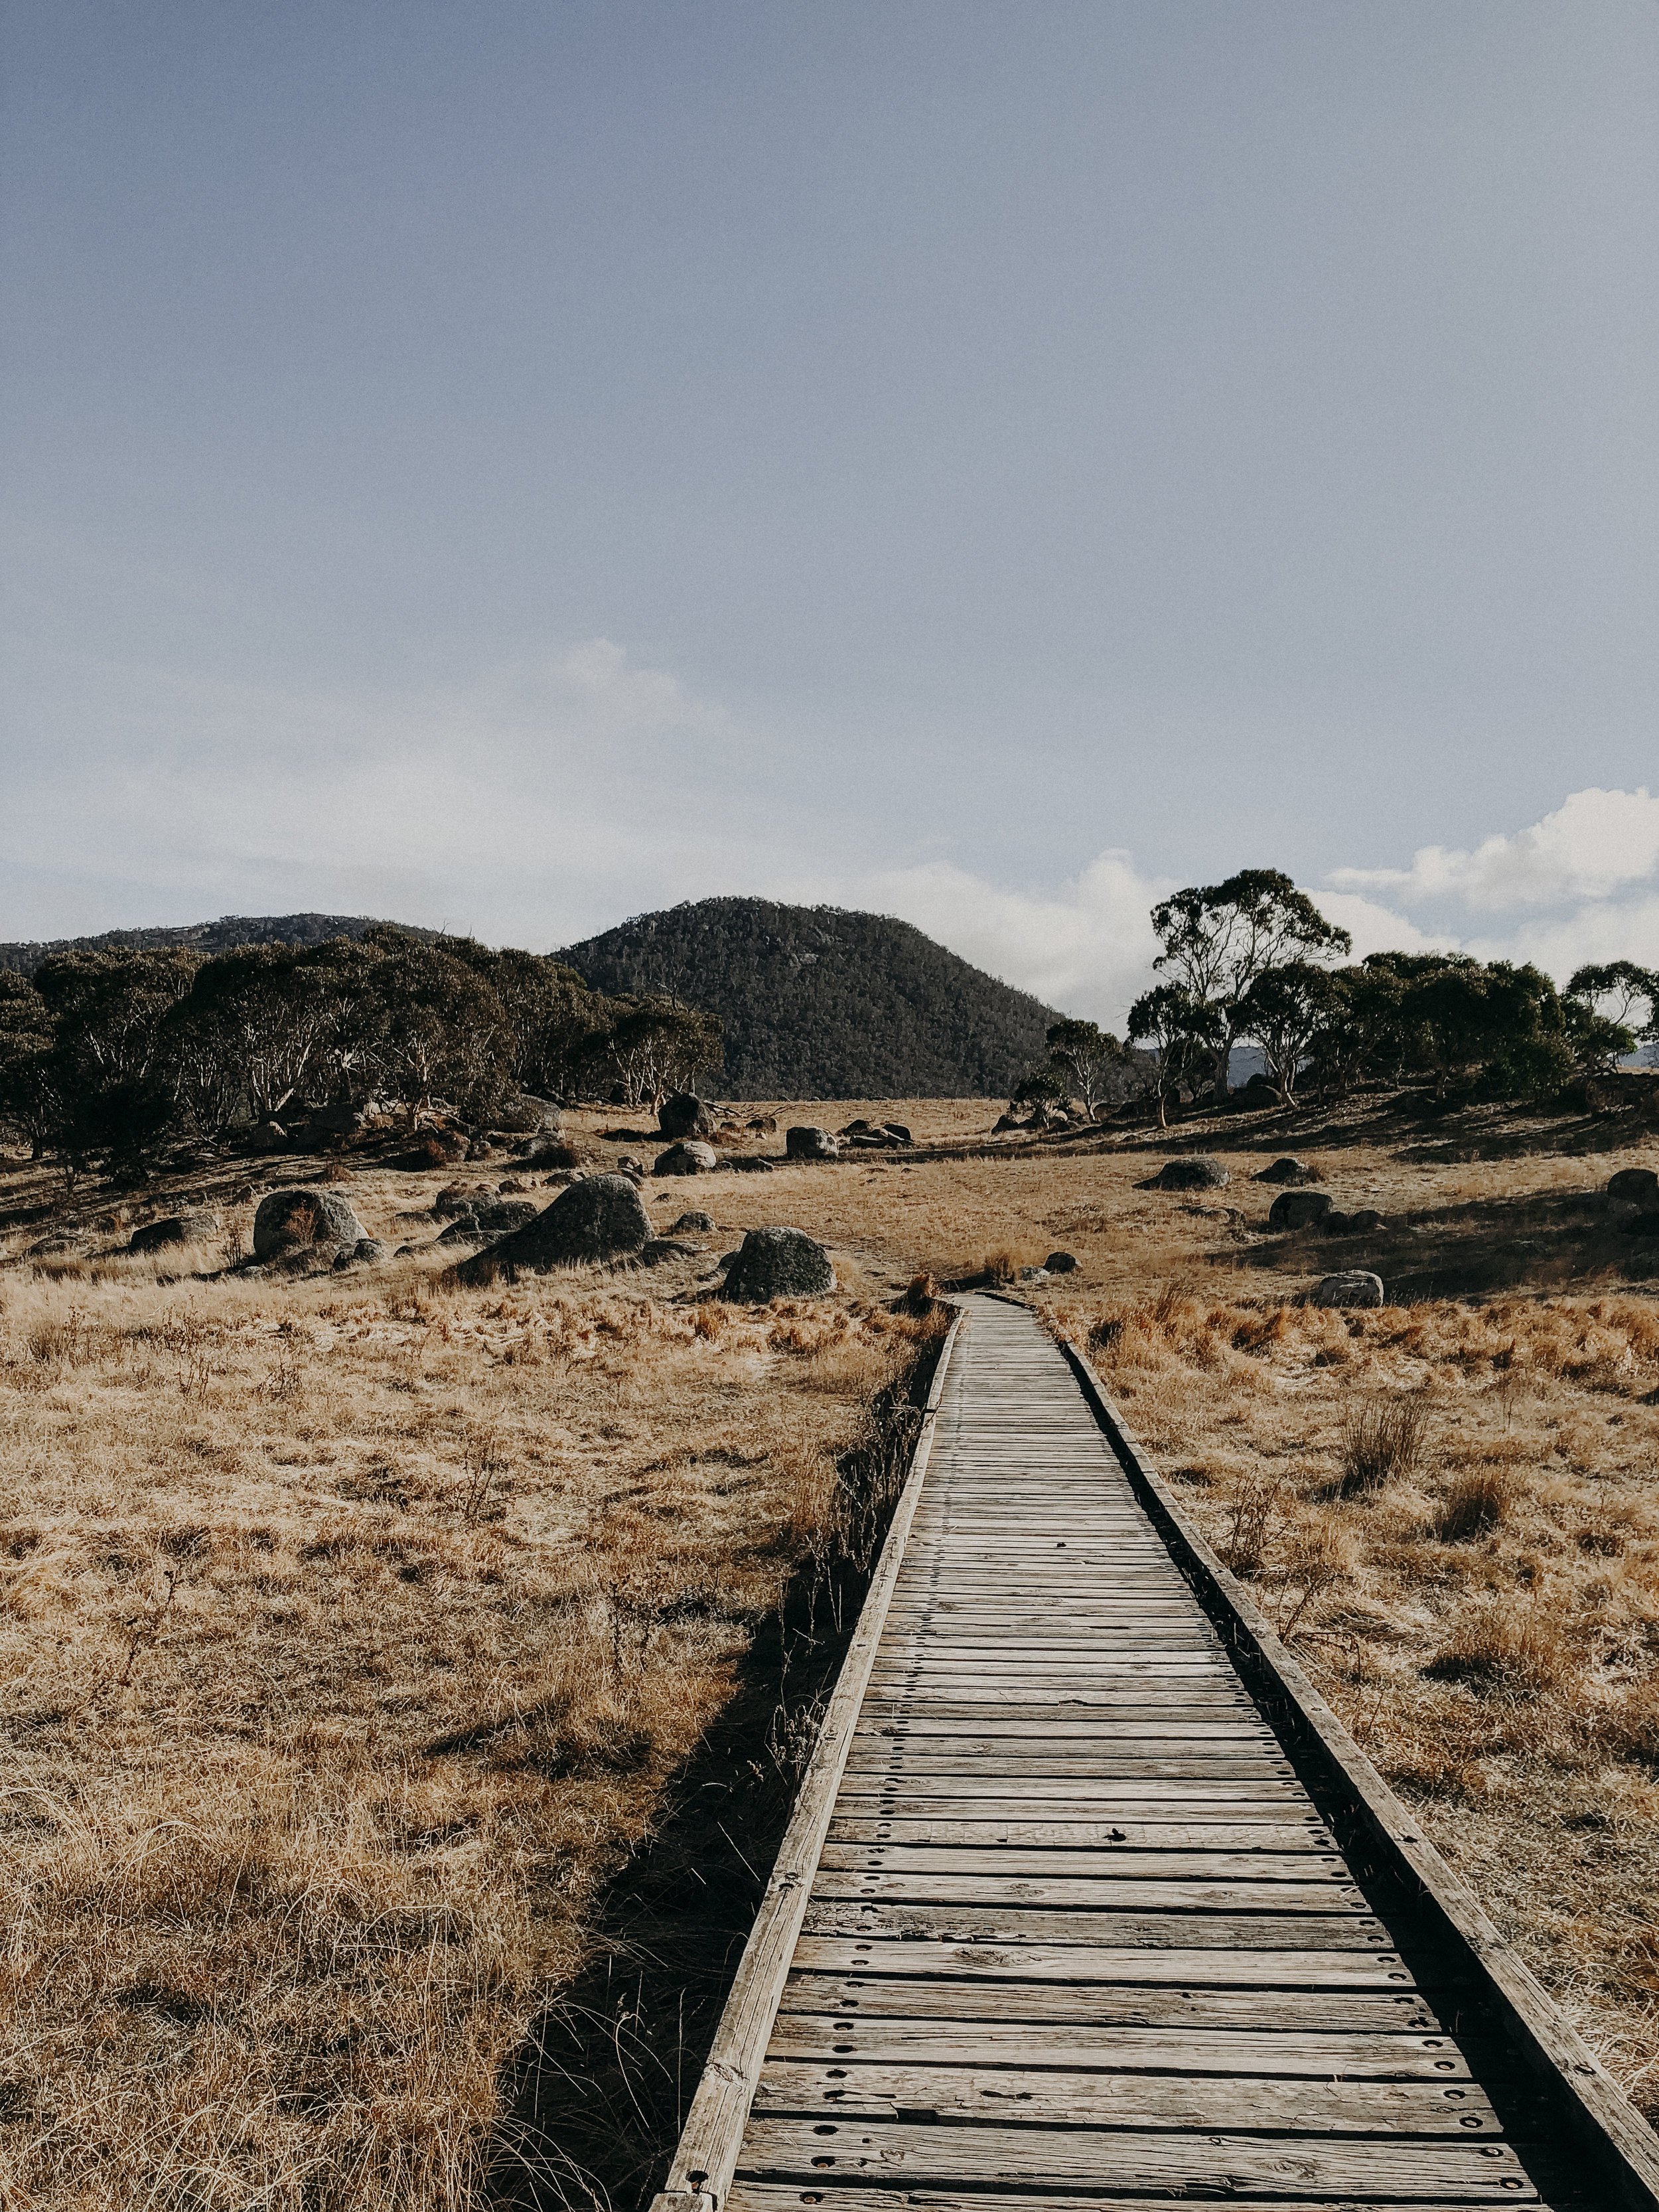     Yankee Hat Rock    -  This “bush walk” was probably my favorite. It’s located within the Namadgi National Park, where the landscape was breathtaking, there were mobs of kangaroos (Did you know a group of kangaroos is called a “mob”?), and at the 